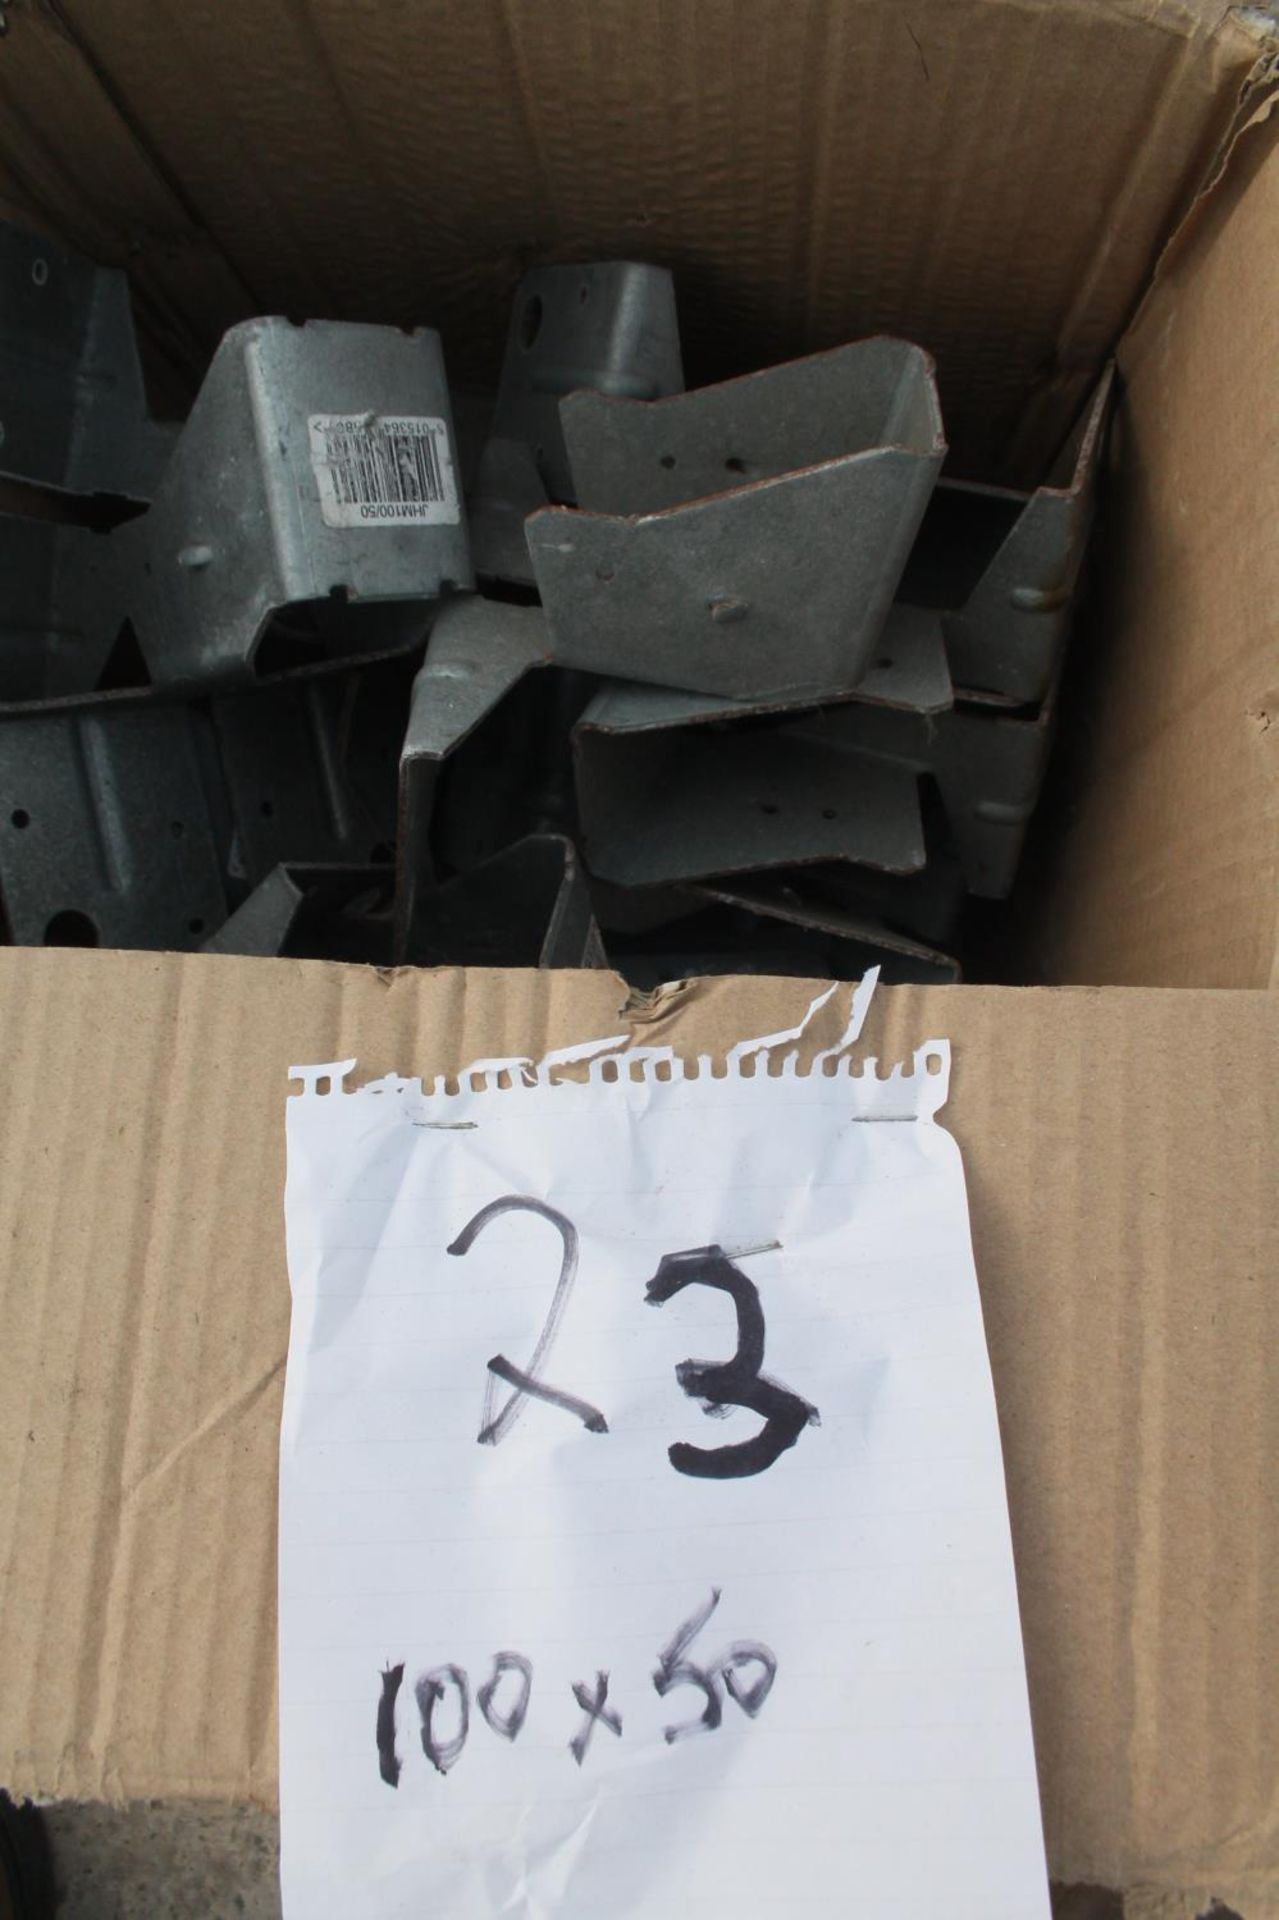 3 BOXES OF JOIST HANGERS (72) VARIOUS SIZES + VAT - Image 6 of 6